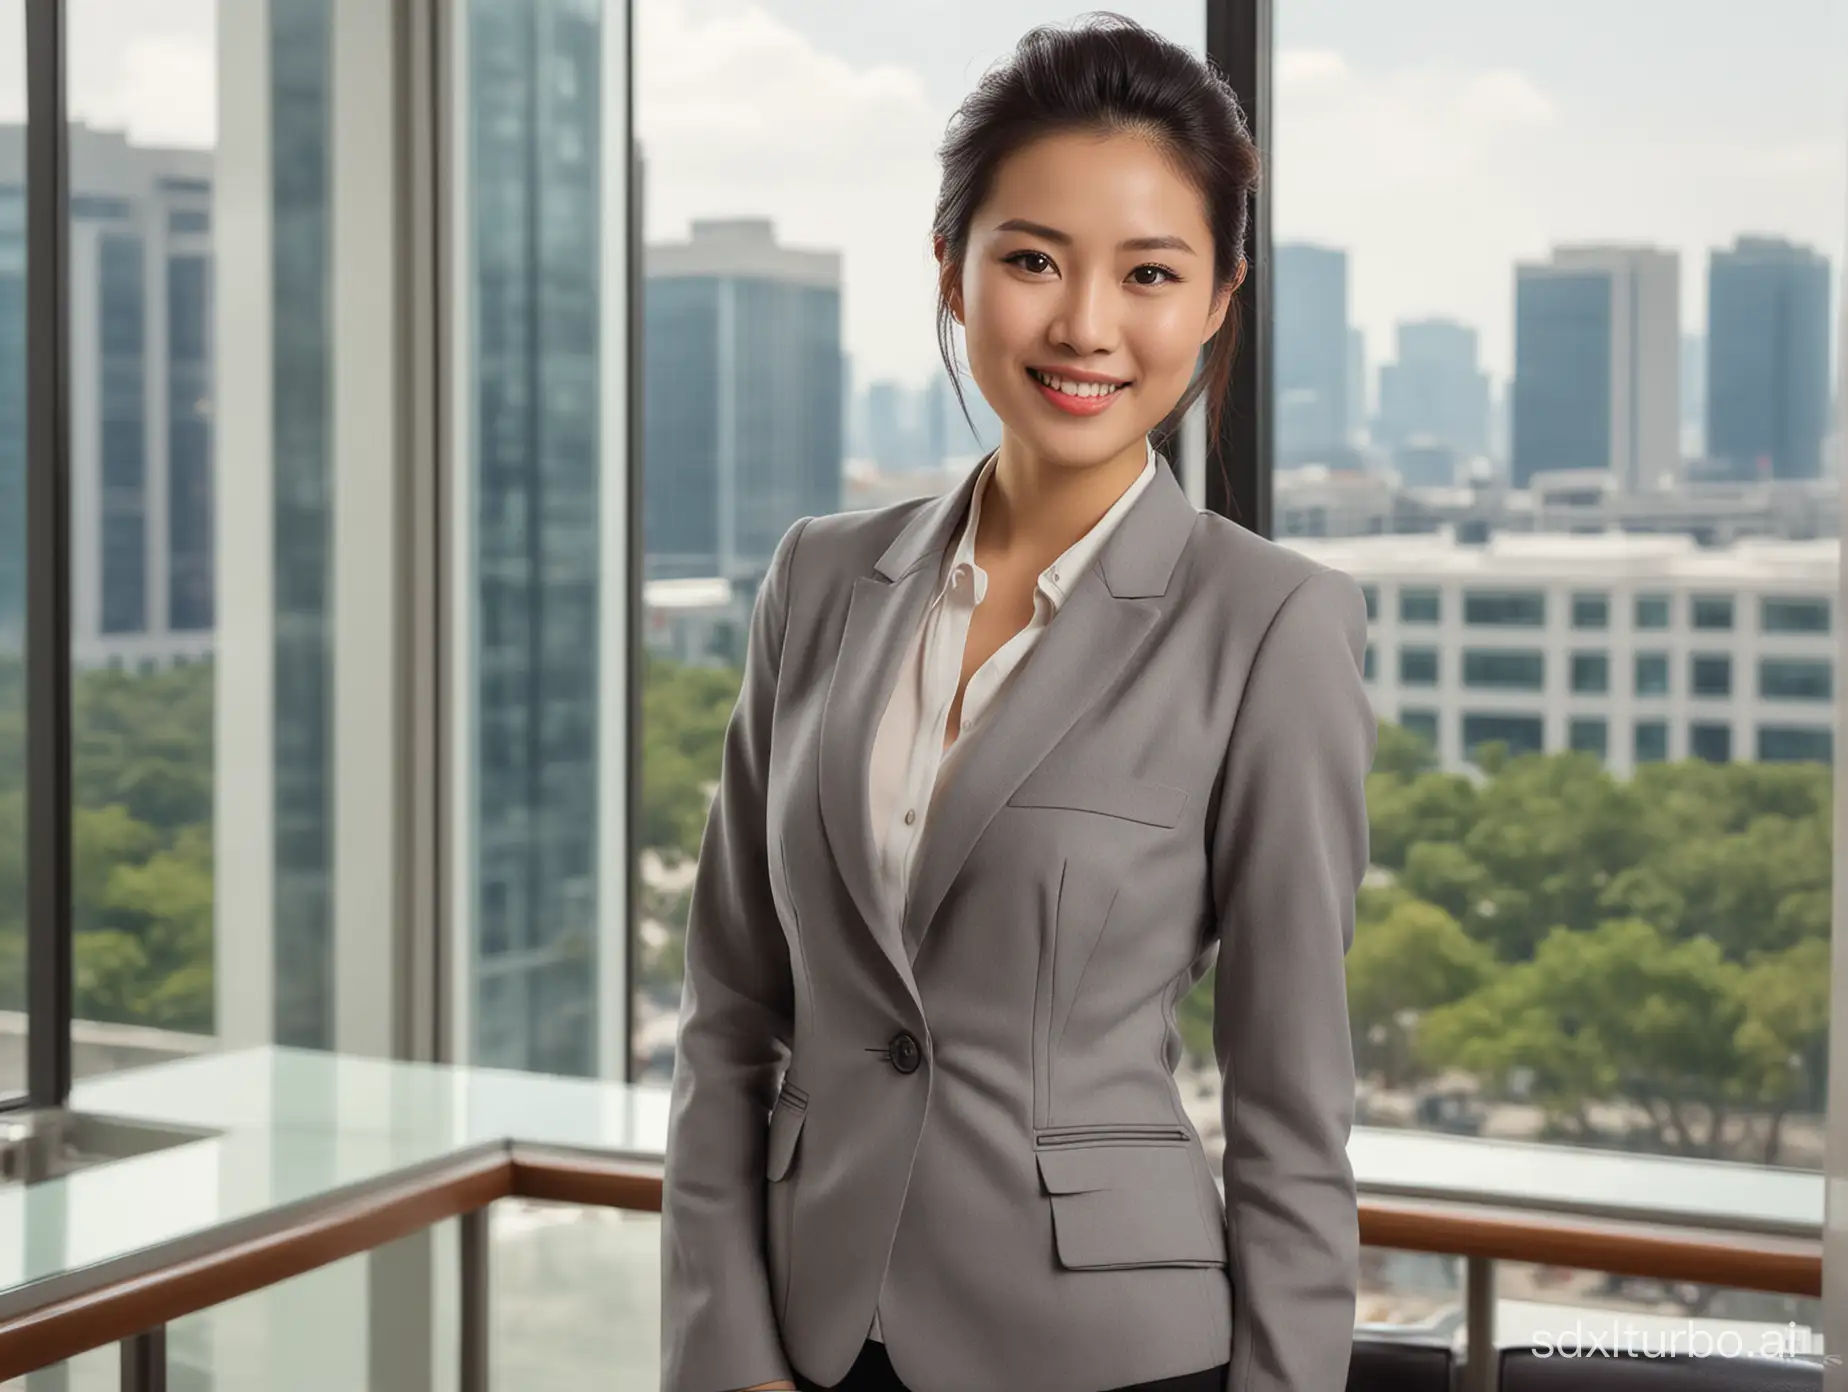 A captivating high-resolution image of a 28-year-old Chinese woman in a professional ensemble. She is elegantly dressed in a tailored blazer and pencil skirt, with her hair styled in a chic updo. Her sweet, genuine smile radiates warmth and sincerity. The background is a modern, spacious office with floor-to-ceiling glass windows, showcasing mesmerizing 360-degree sea views that blend seamlessly with the sky., photo